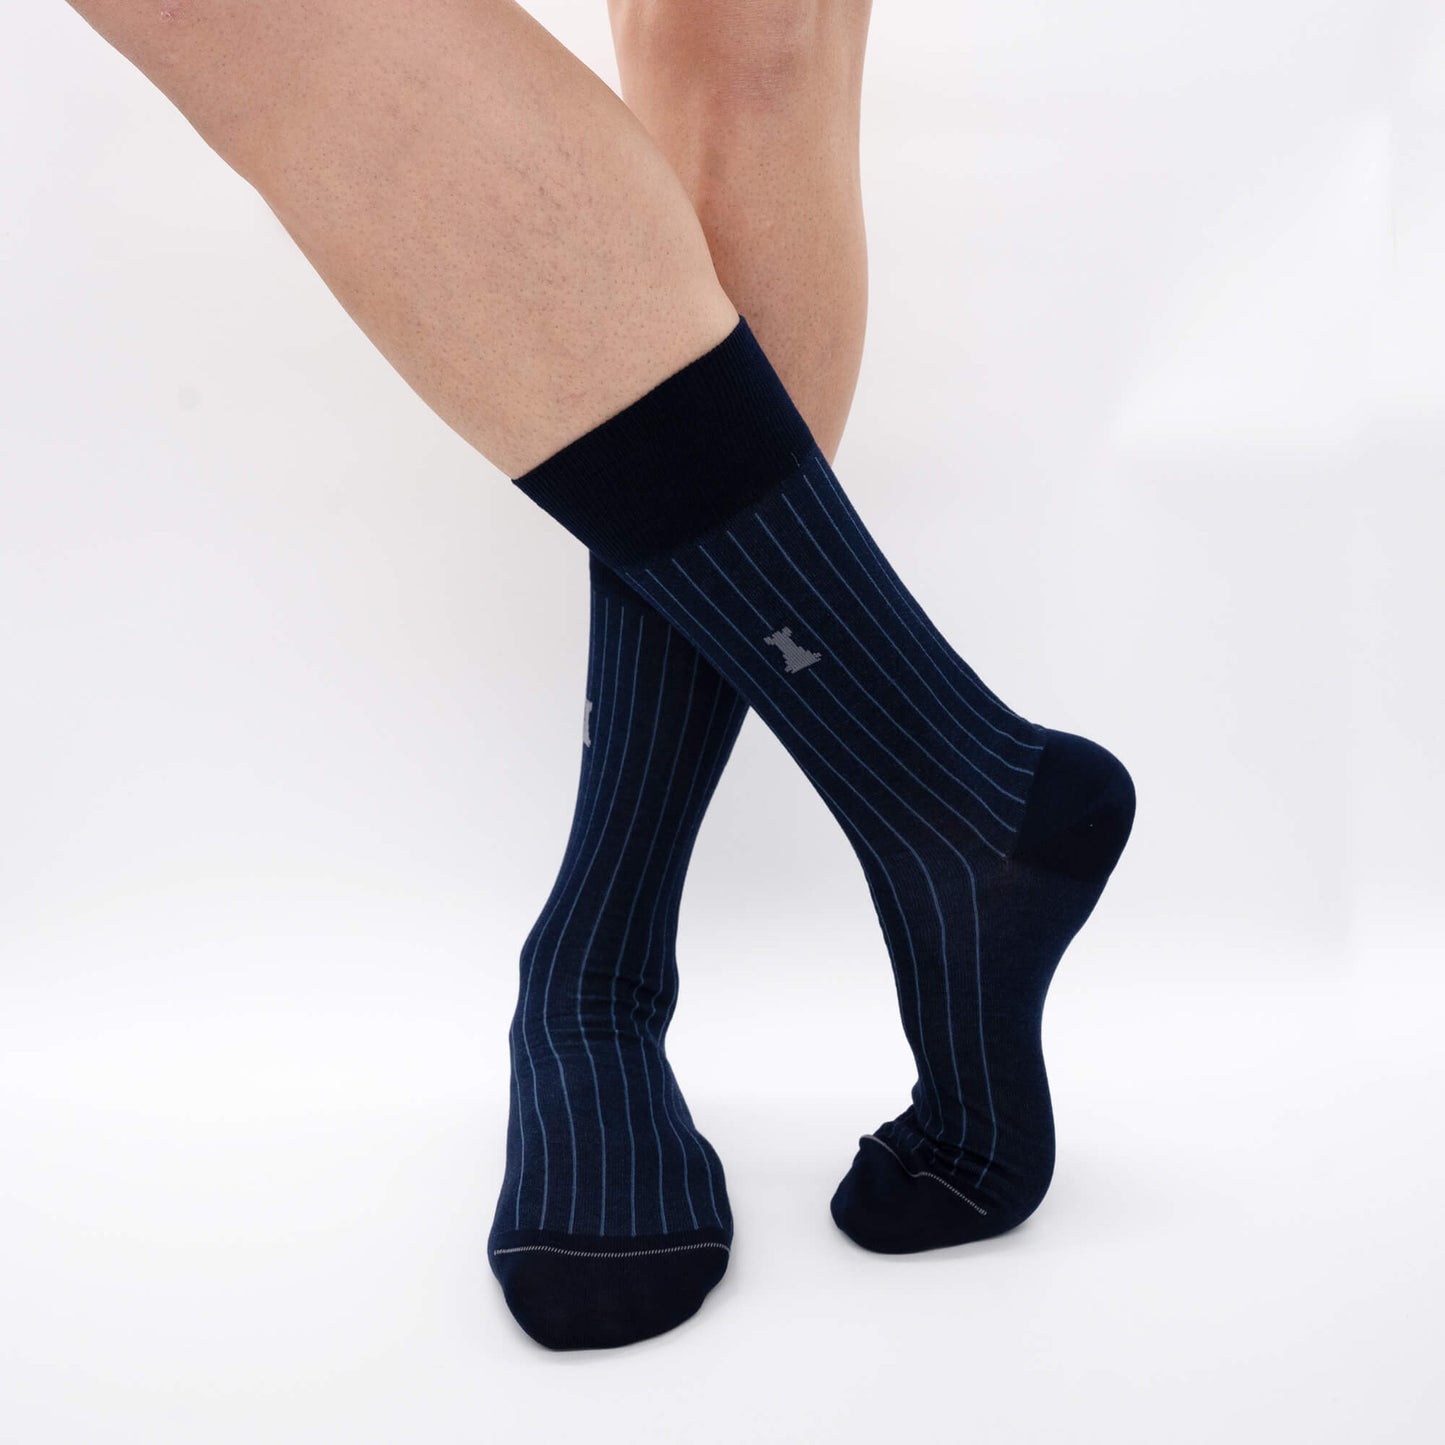 Daily Office Box of 6 crew socks- 3x solid color & 3x Micro Ribs